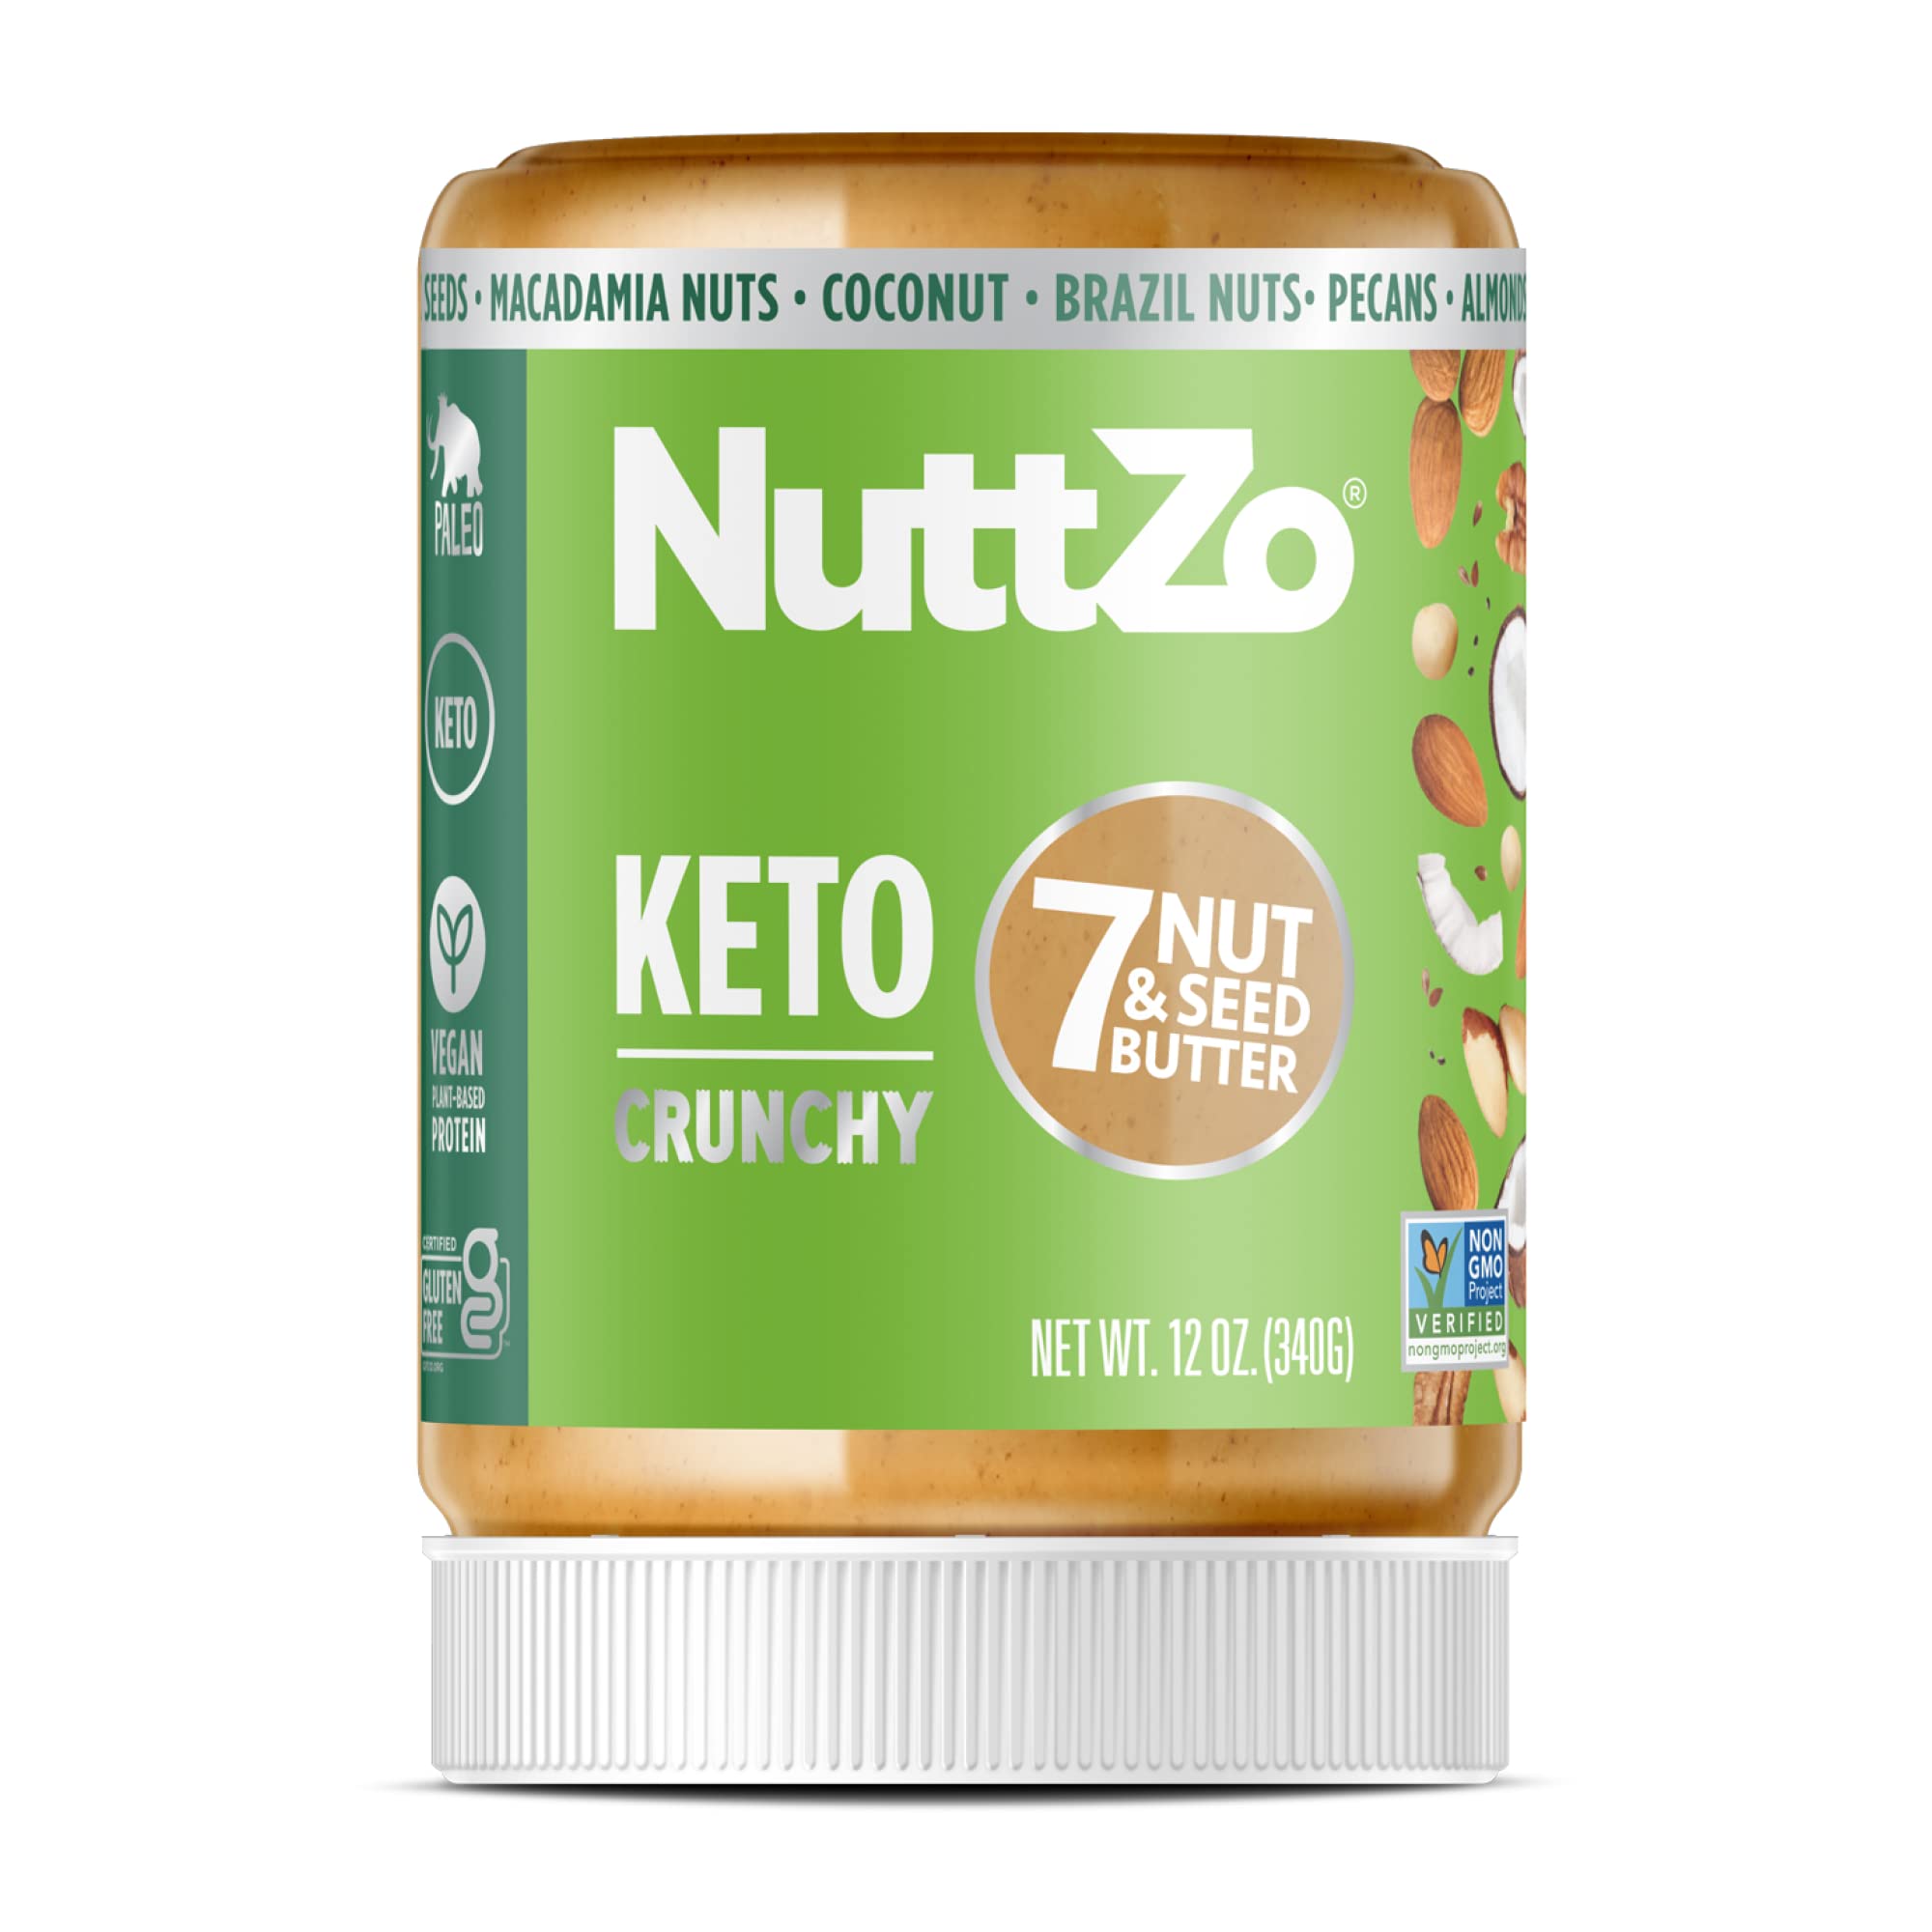 Book Cover Keto Nut Butter by NuttZo | 7 Nuts & Seeds Blend, Keto-Friendly, Gluten-Free, Vegan, Kosher | 1g Sugar, 4g Protein, 2g Net Carbs | 12oz Jar Keto Nut Butter 12 Ounce (Pack of 1)